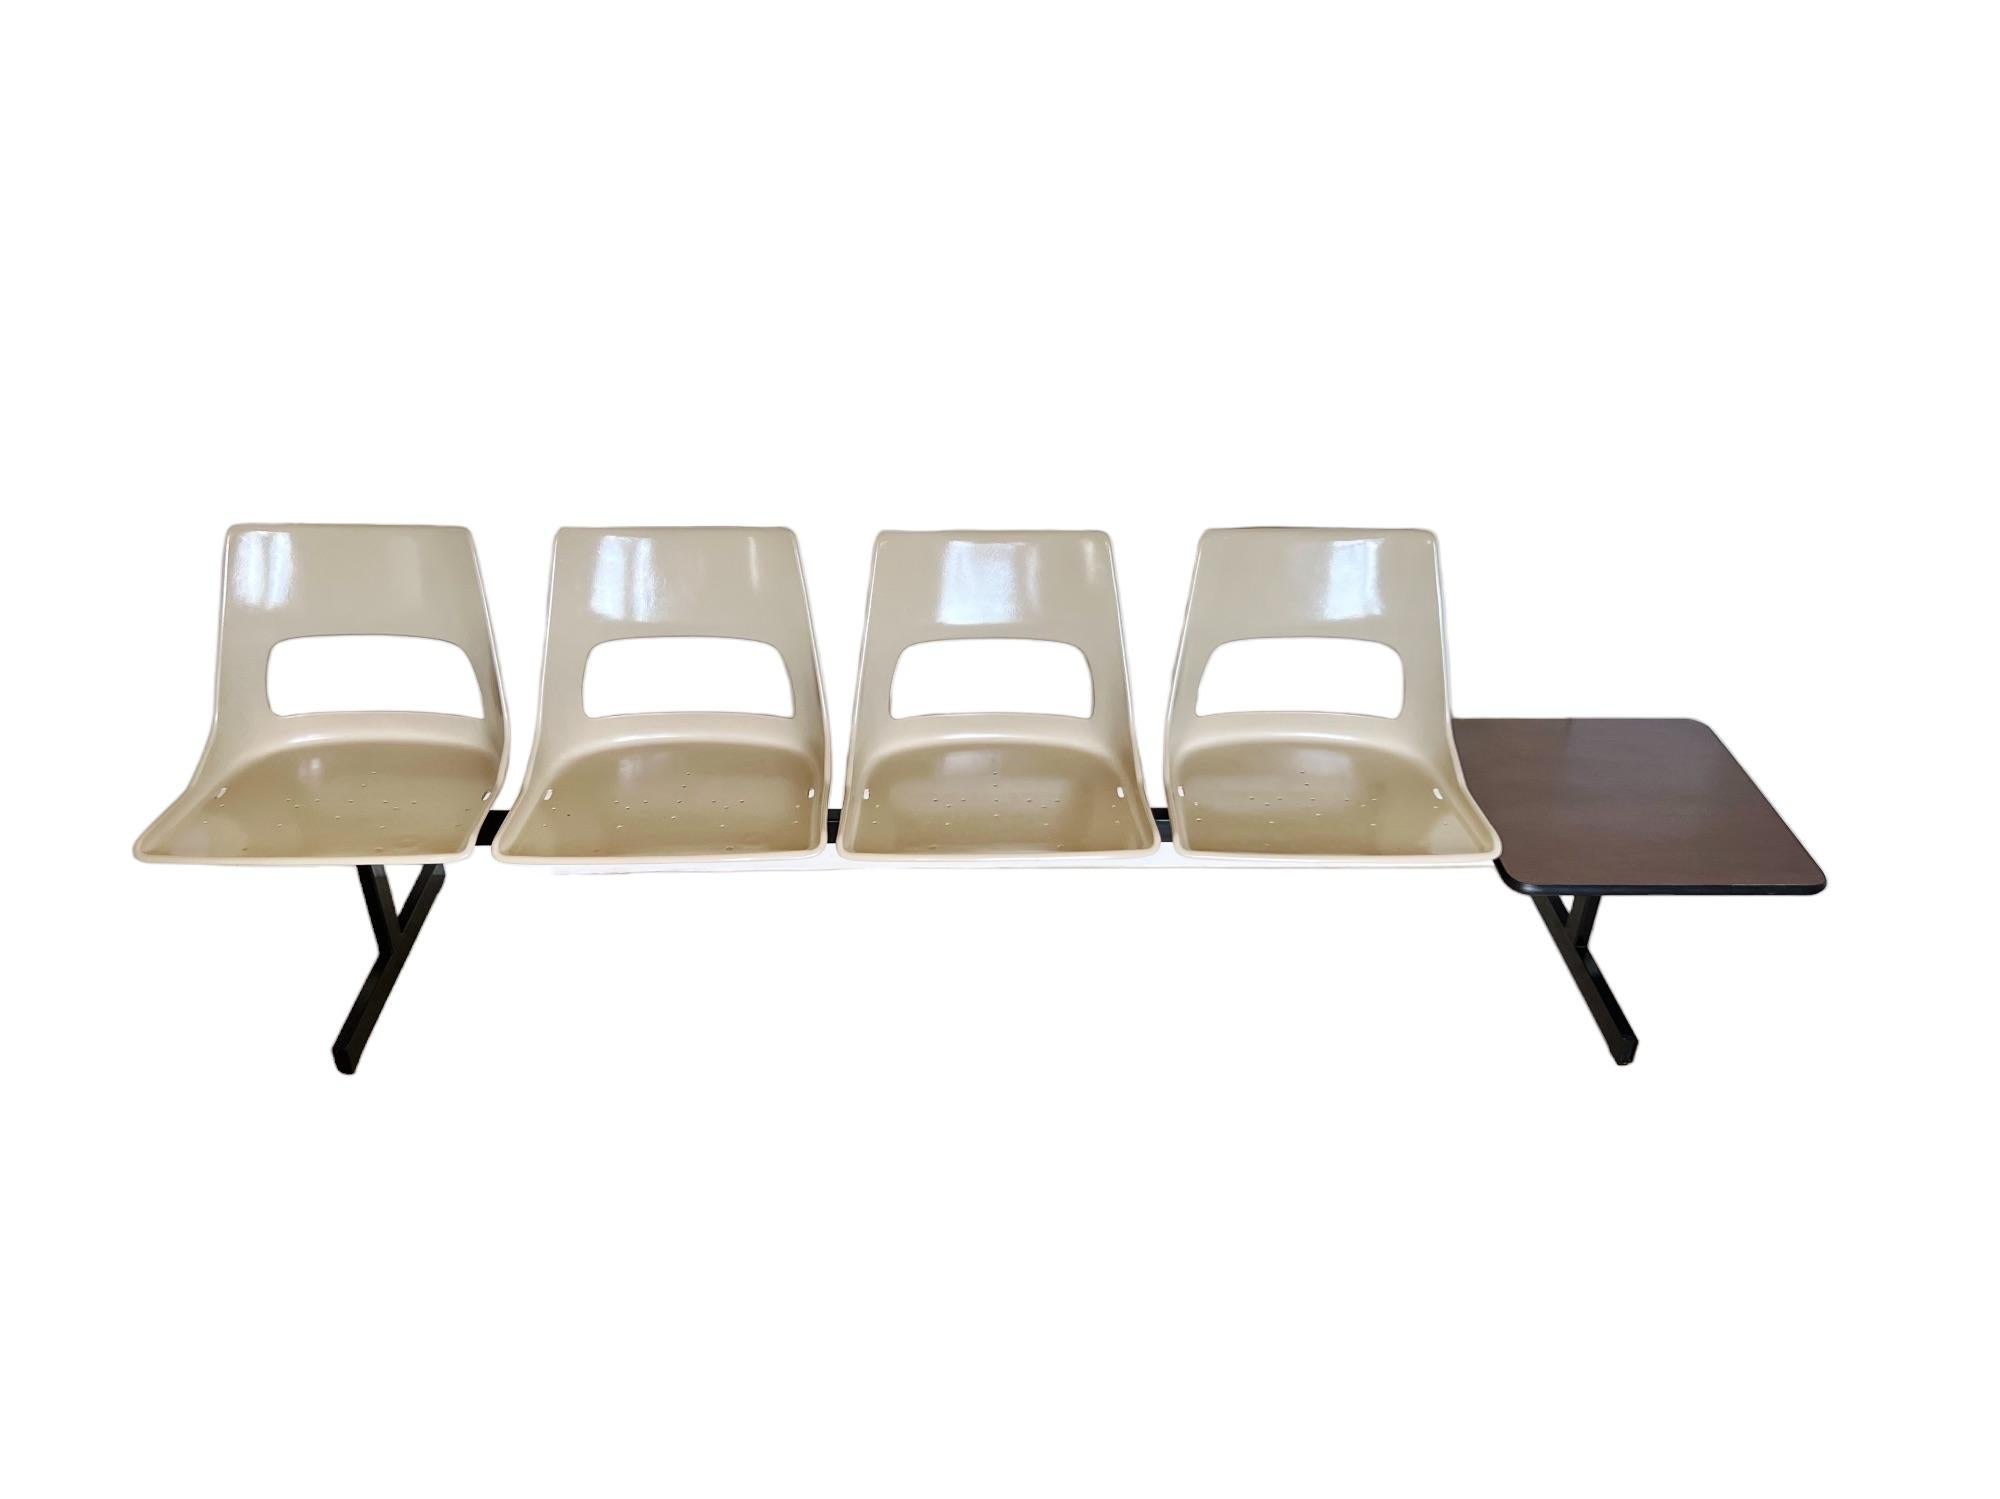 Molded Mid-Century Modern Tandem Four Seat Bench by Krueger, 1970s